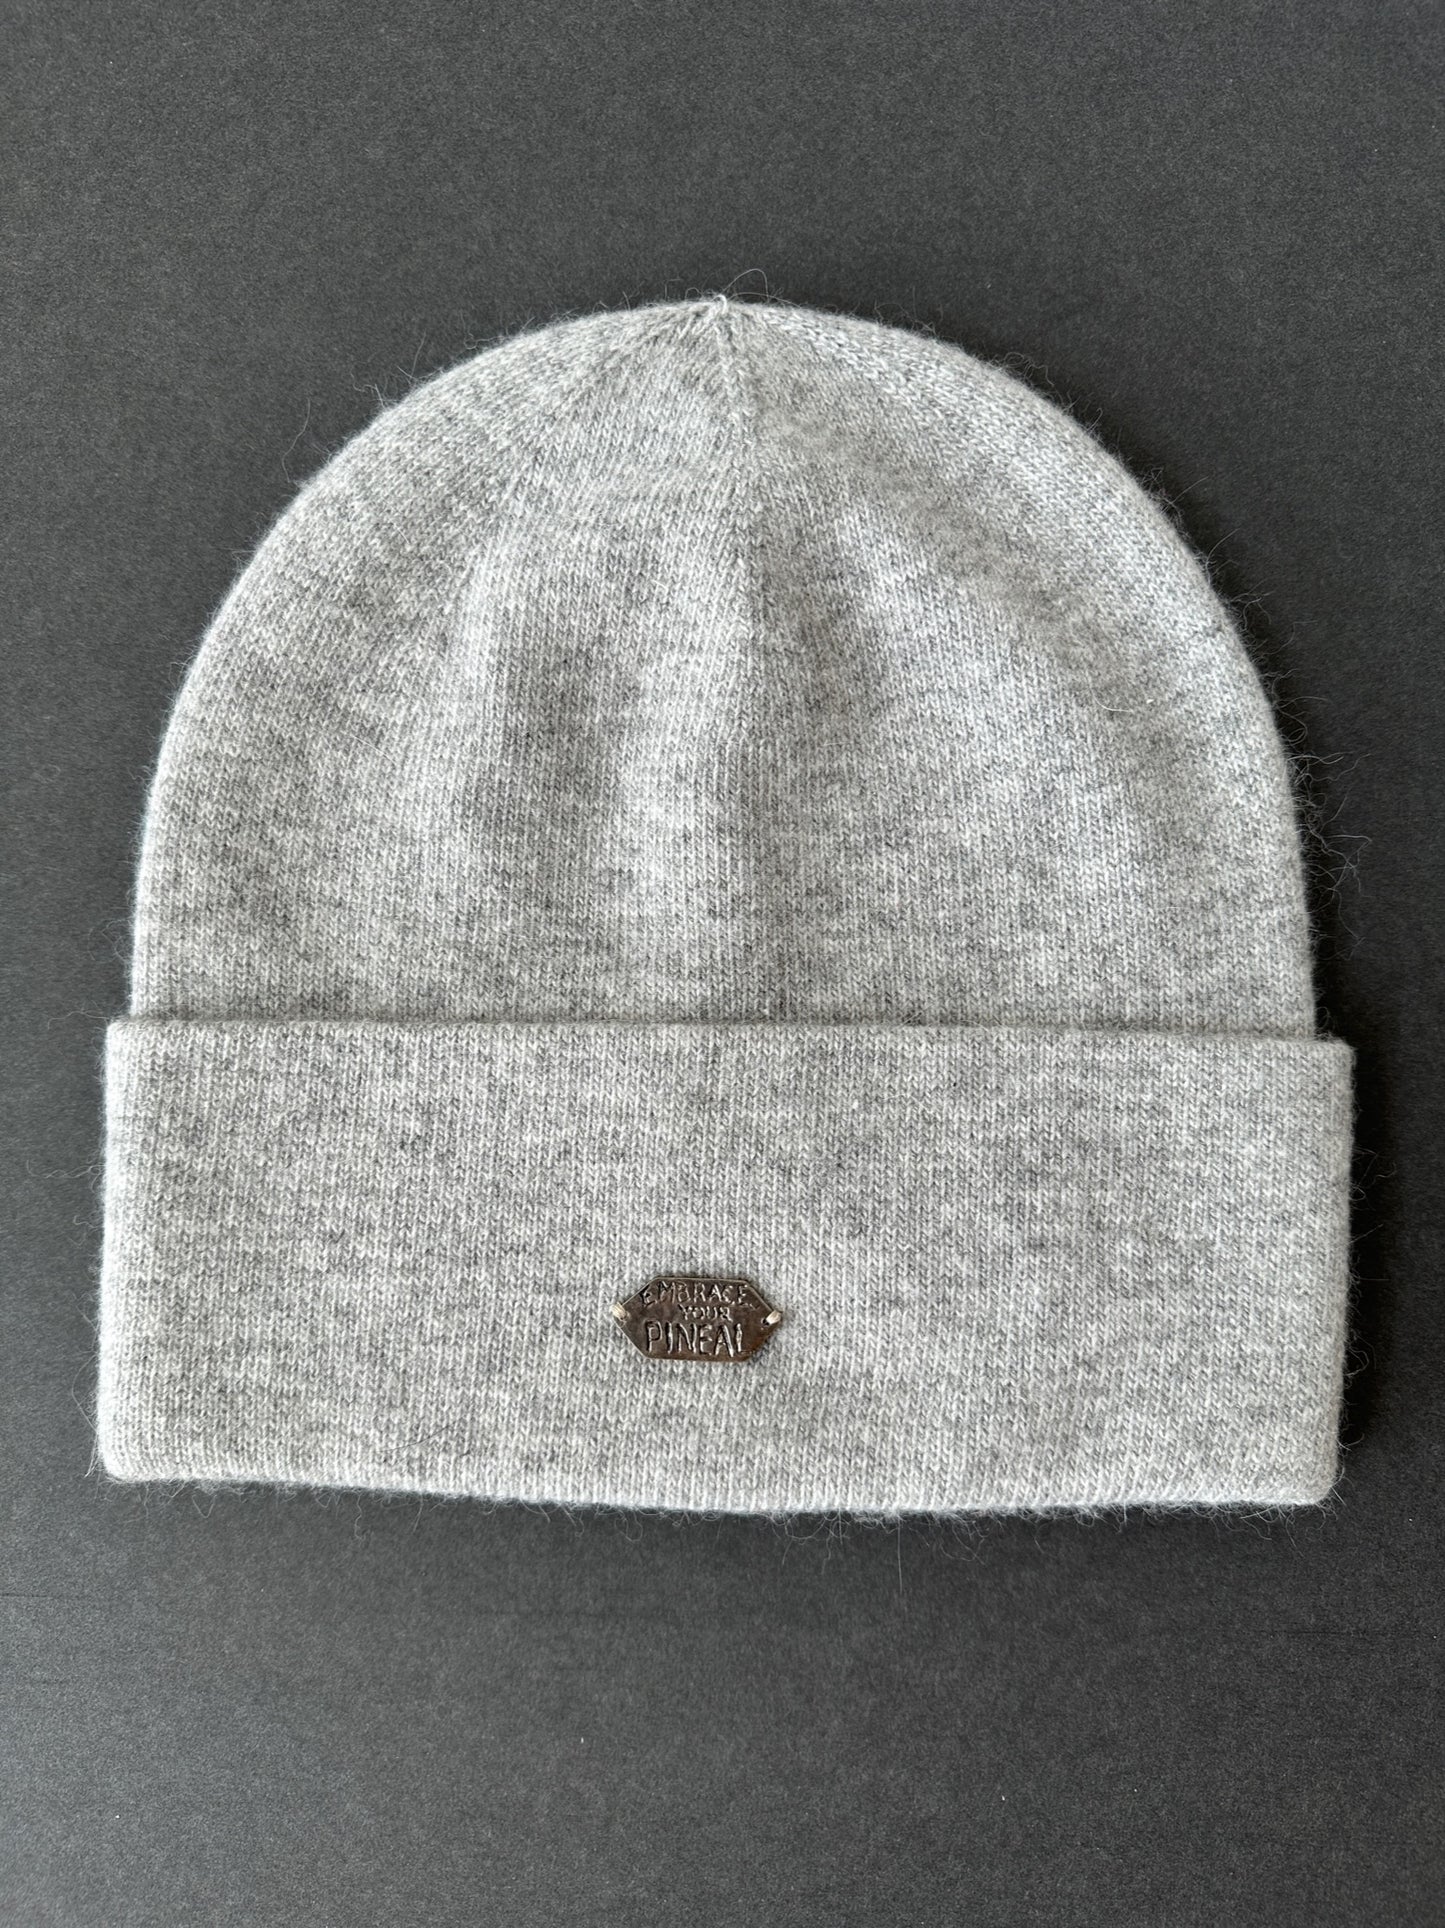 030. Sterling Silver “EMBRACE YOUR PINEAL” Cashmere Beanie in gray